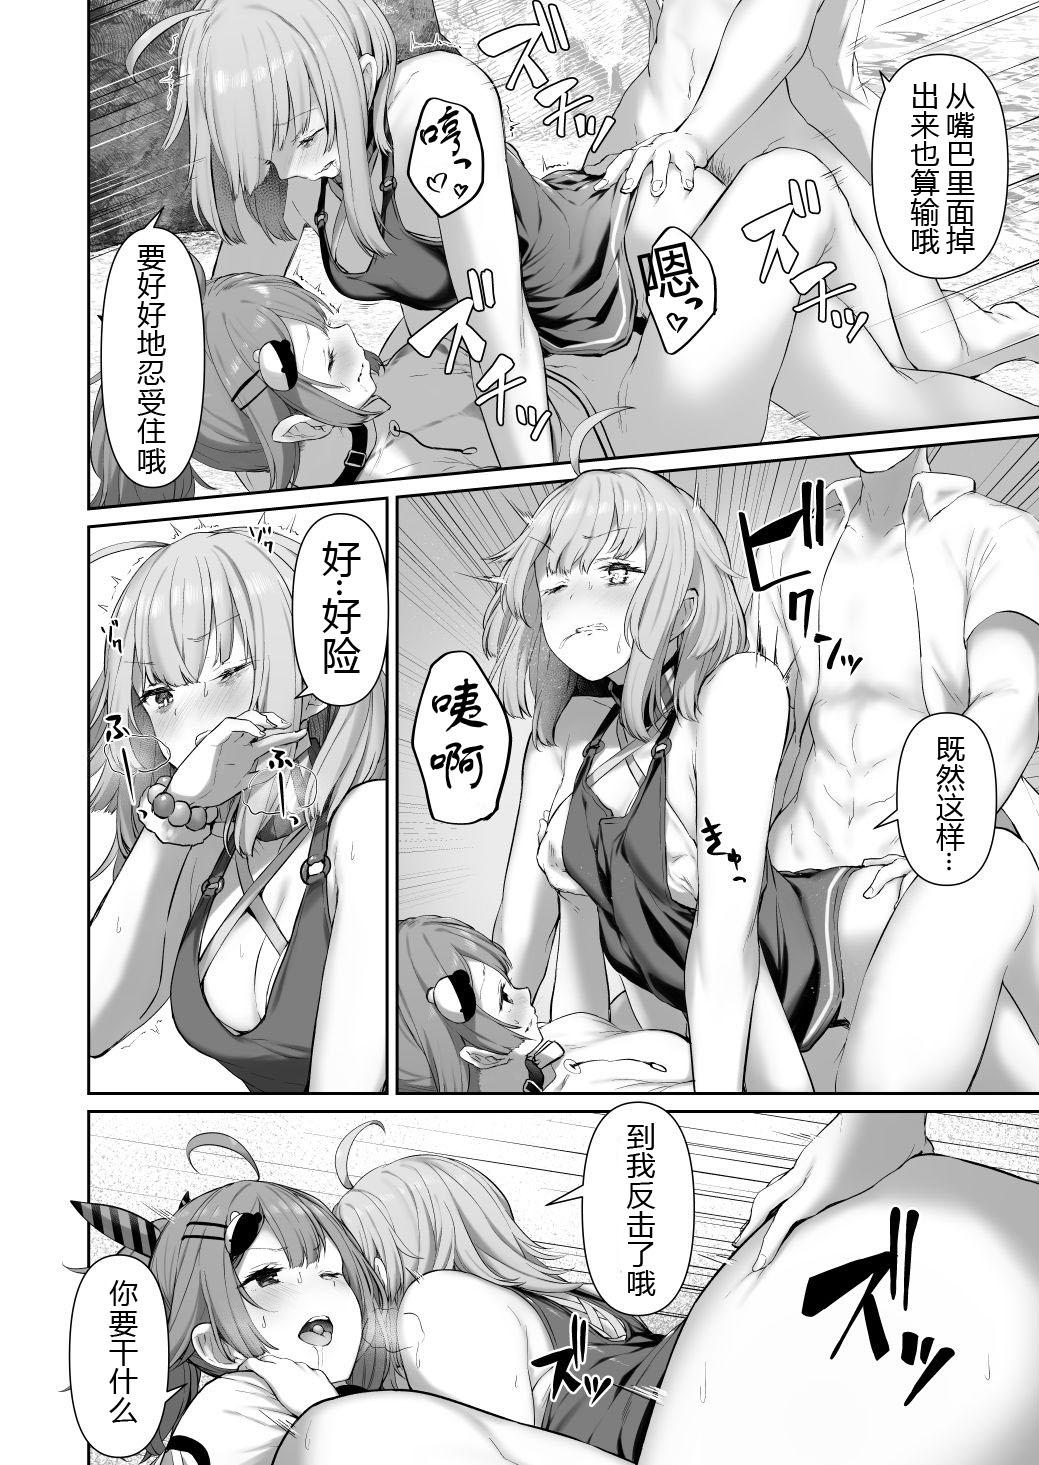 Amatures Gone Wild MP7 and AA-12 no - Girls frontline Pack - Page 10